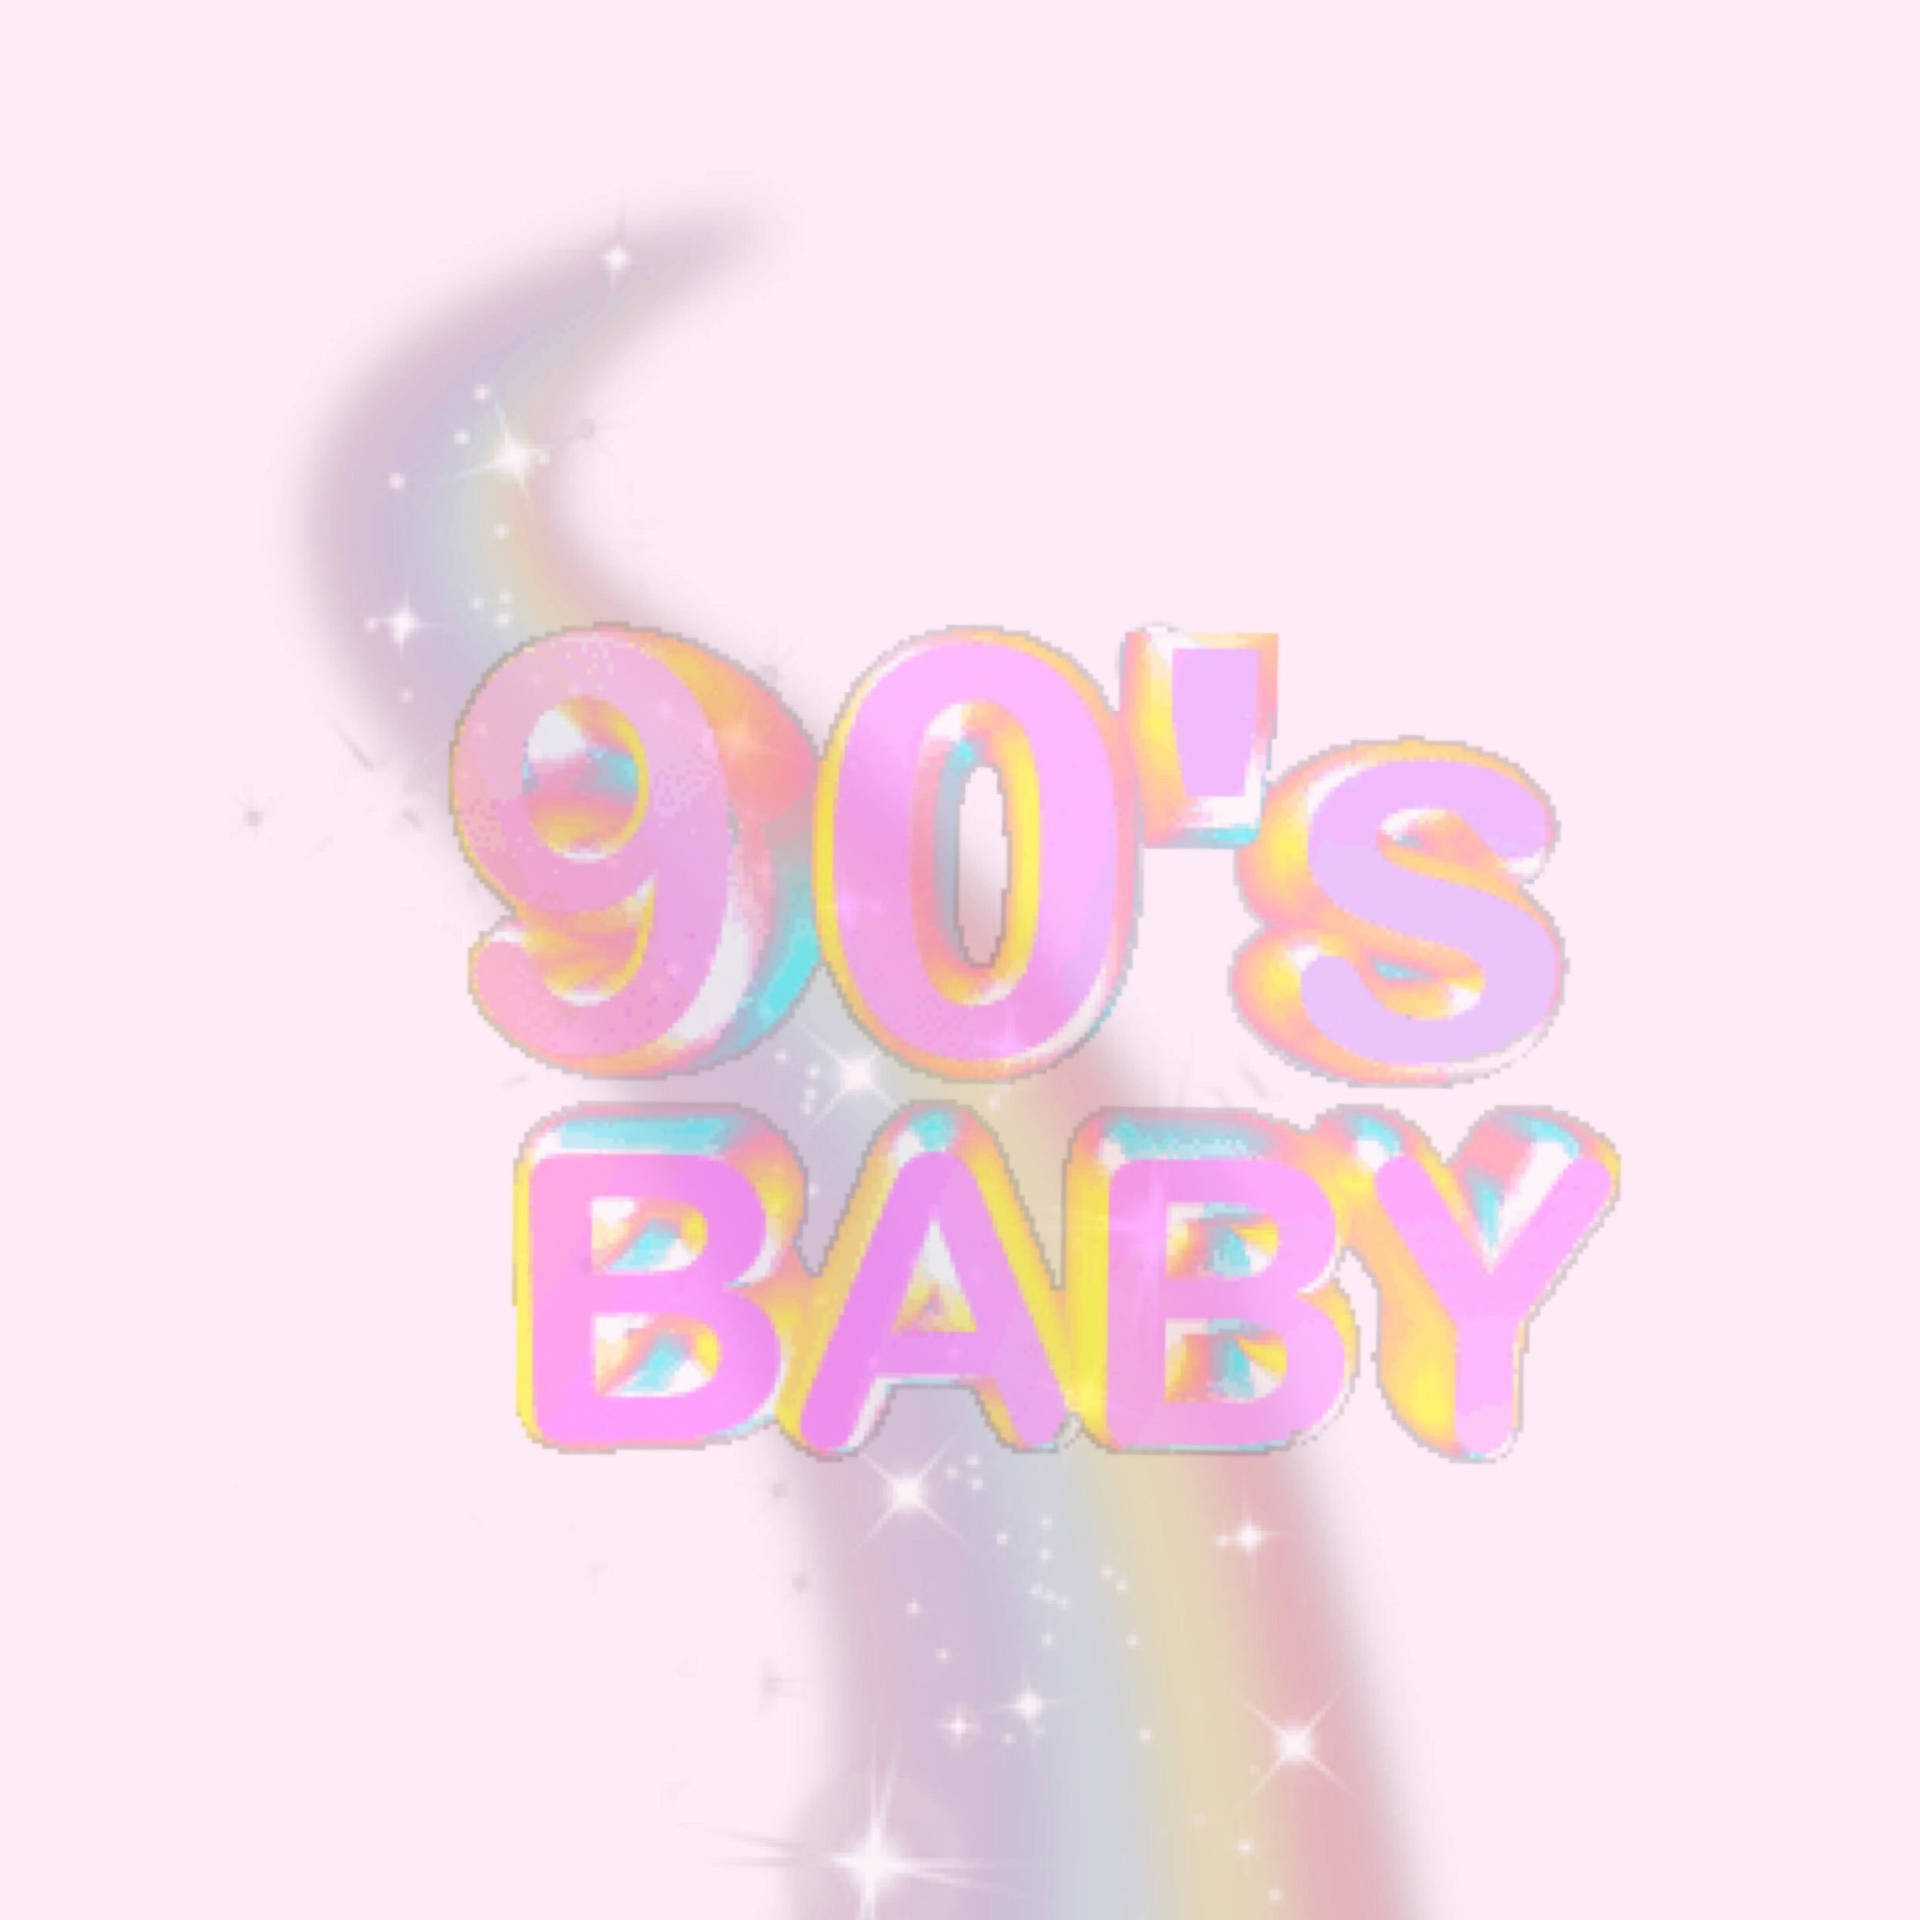 90S 2476X2476 Wallpaper and Background Image